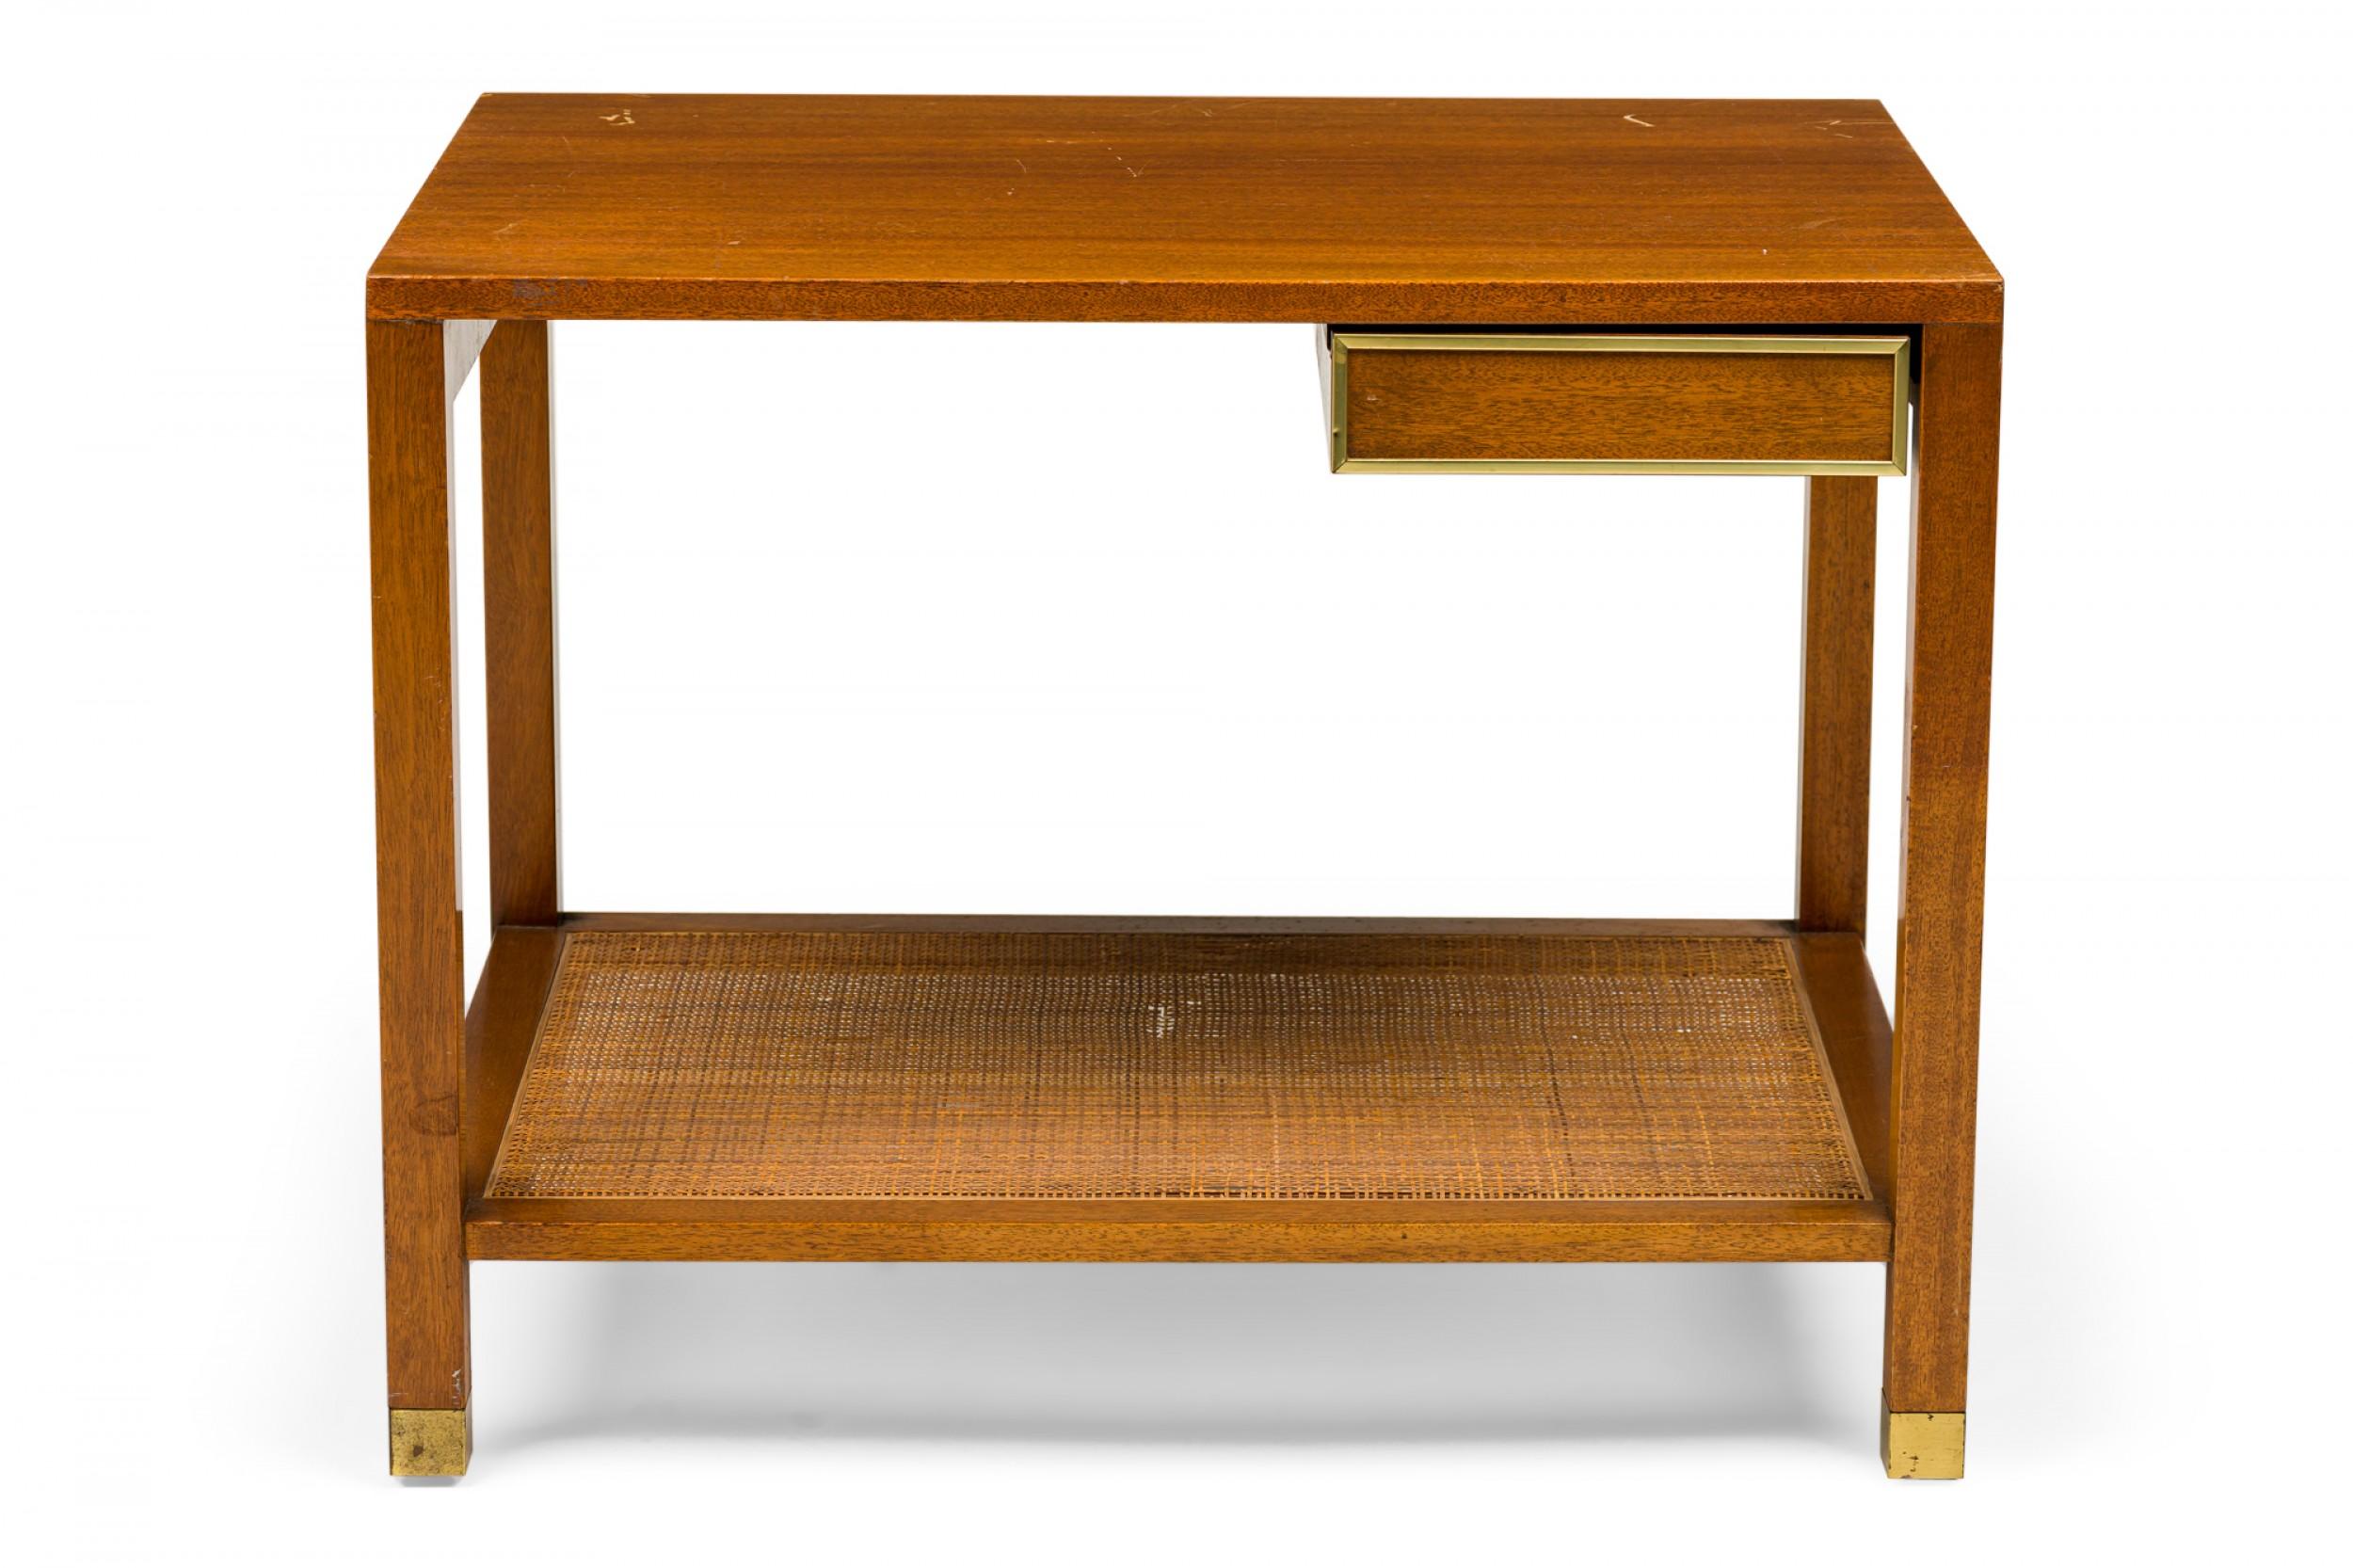 American Mid-Century Parsons-style end / side table with a rectangular wooden top over a single small side-oriented drawer with brass trim supported by four square wooden legs connected with a caned stretcher shelf and ending in brass sabots.